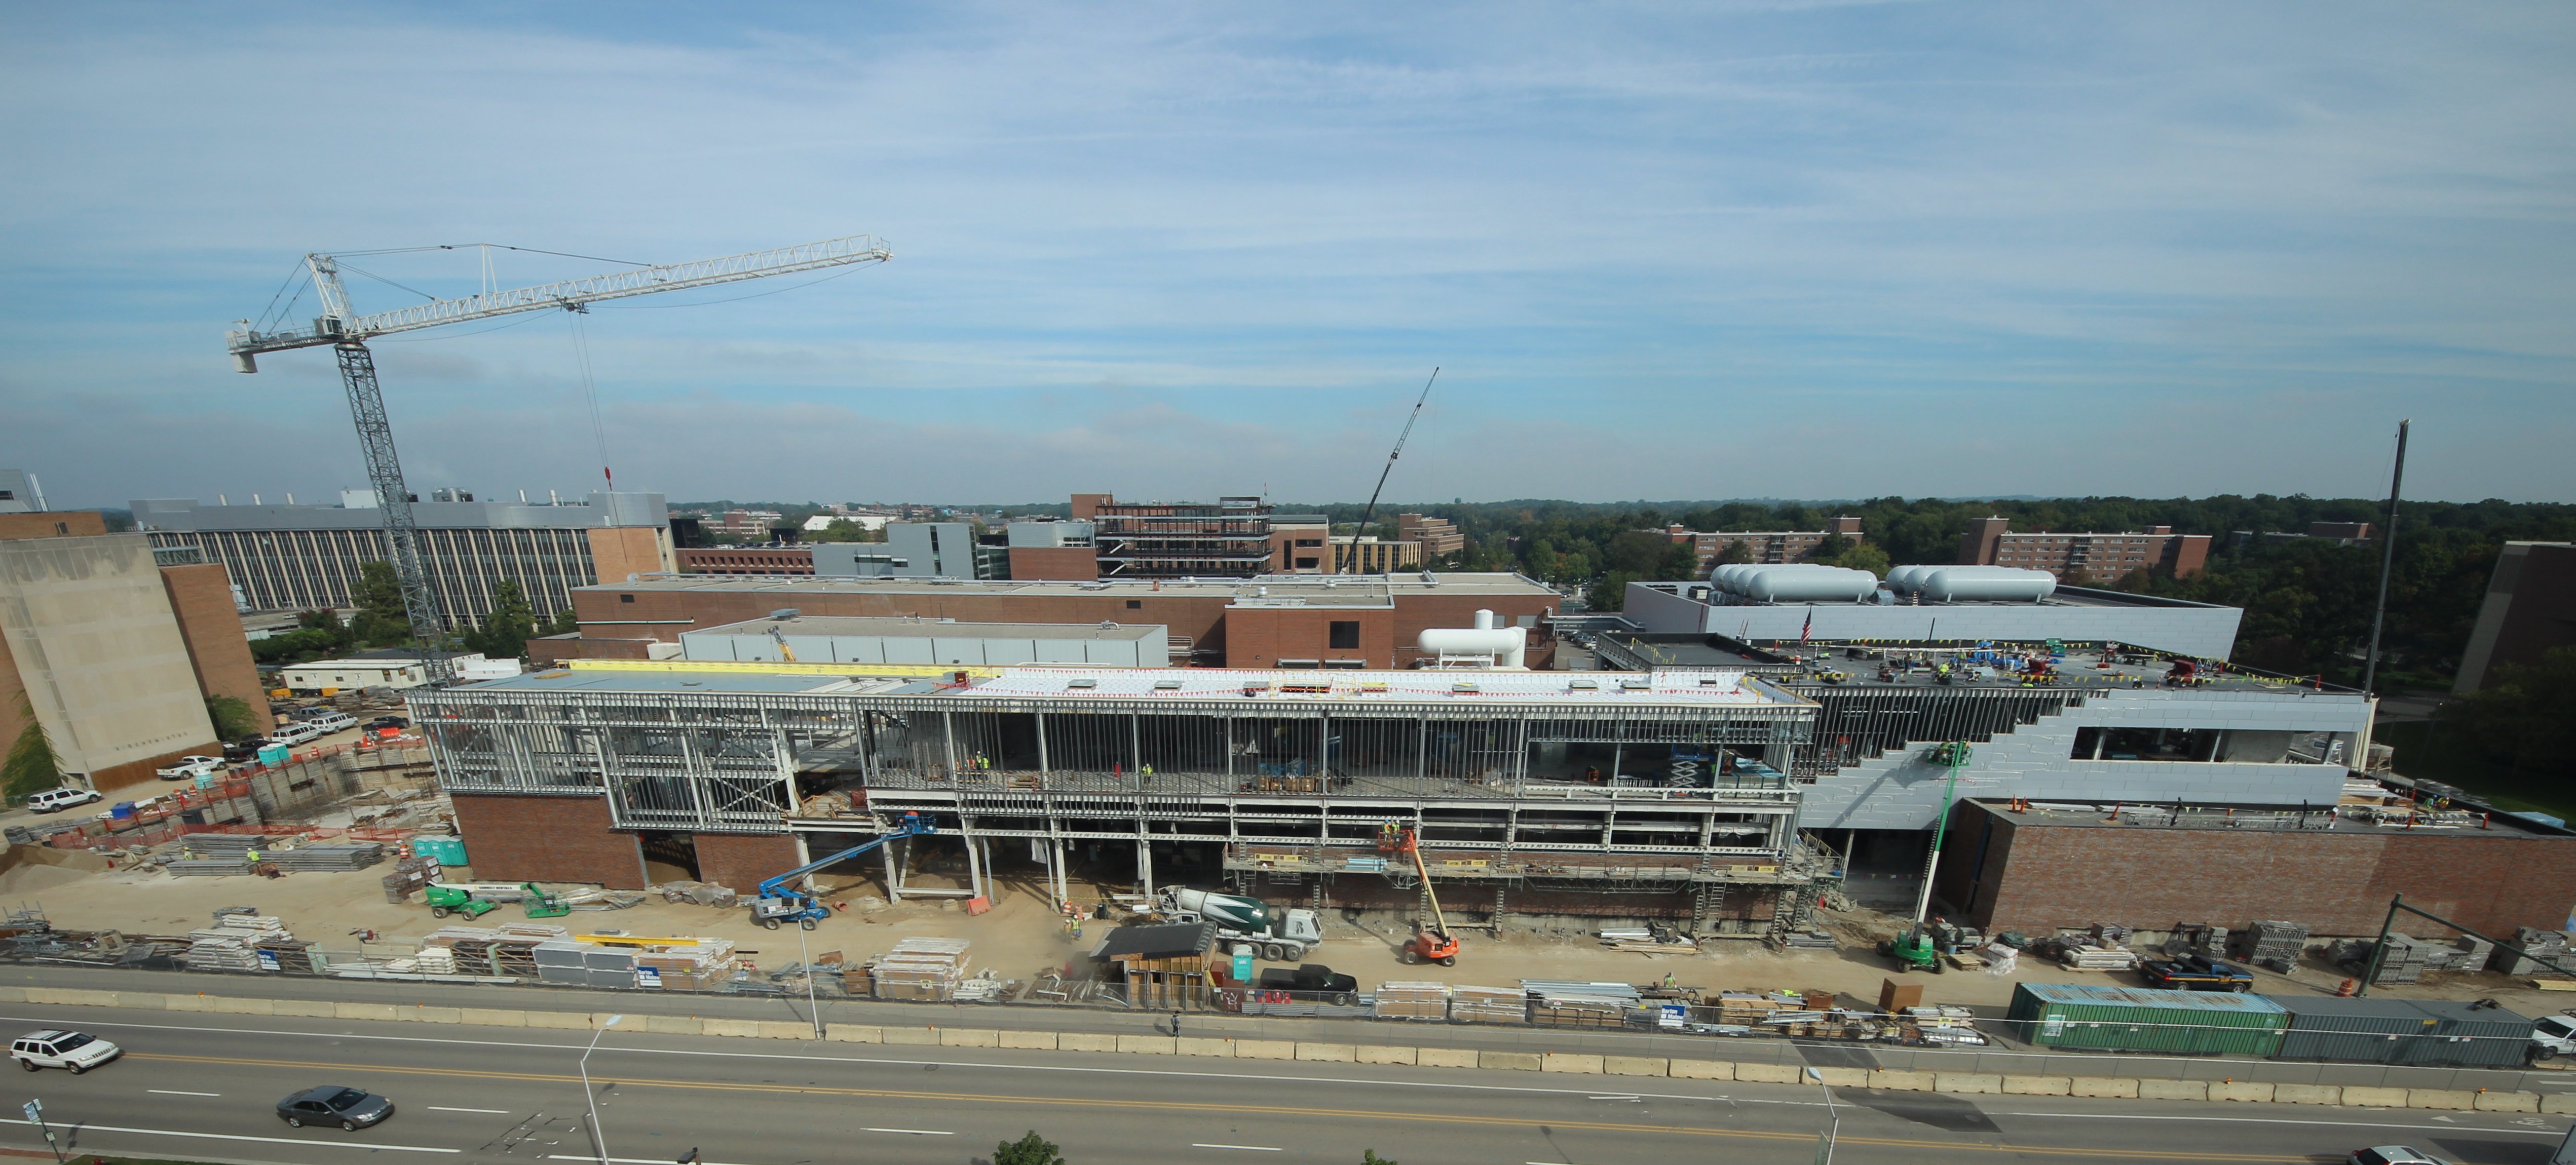 Image of FRIB's current construction